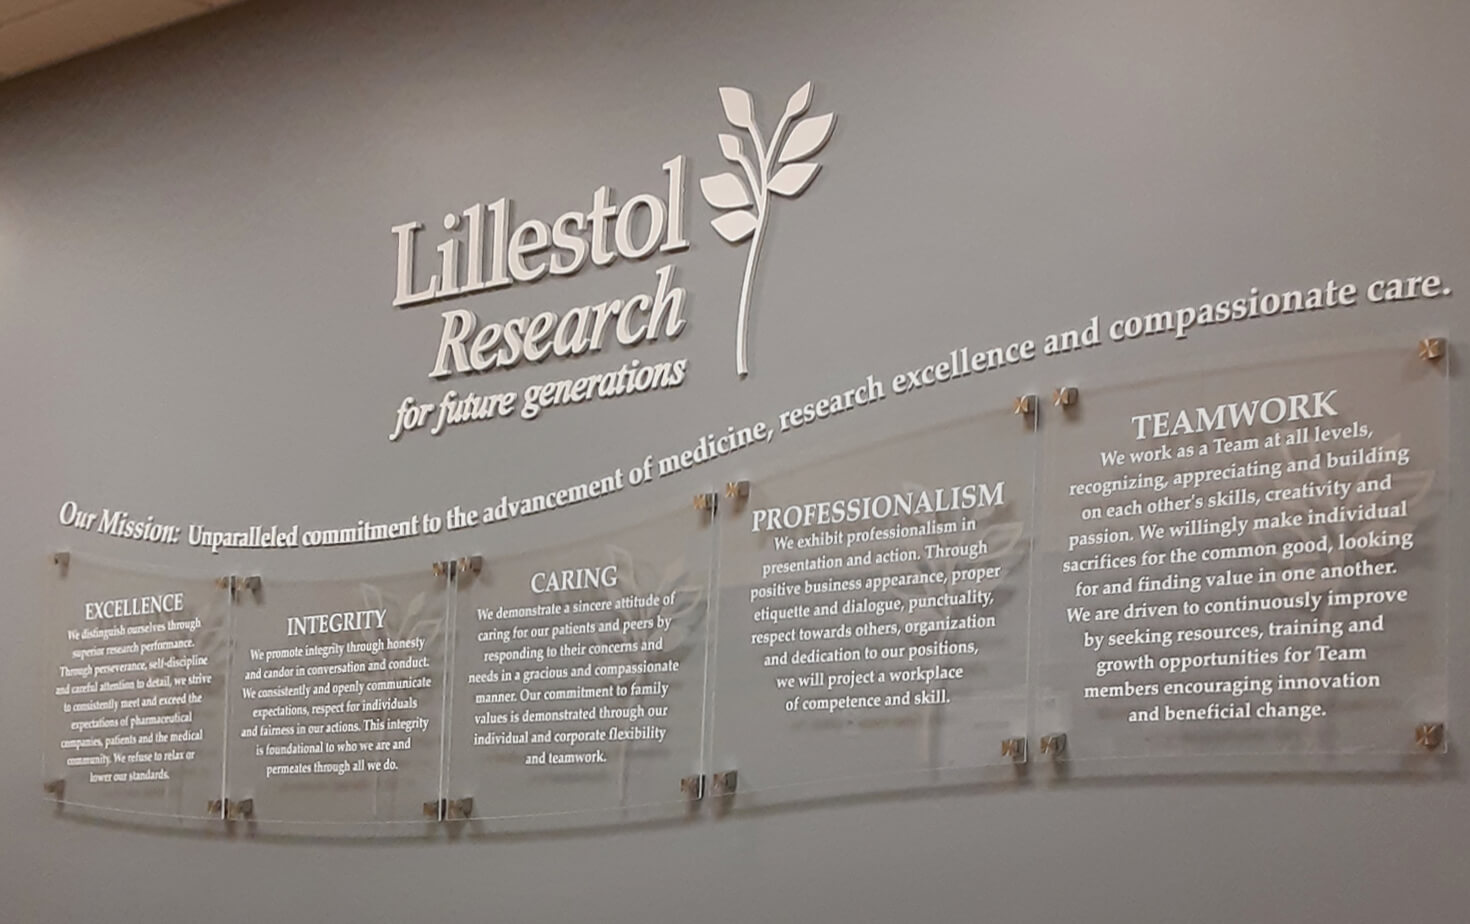 Lillestol Research Fargo ND Interior Display on Wall with Core Values